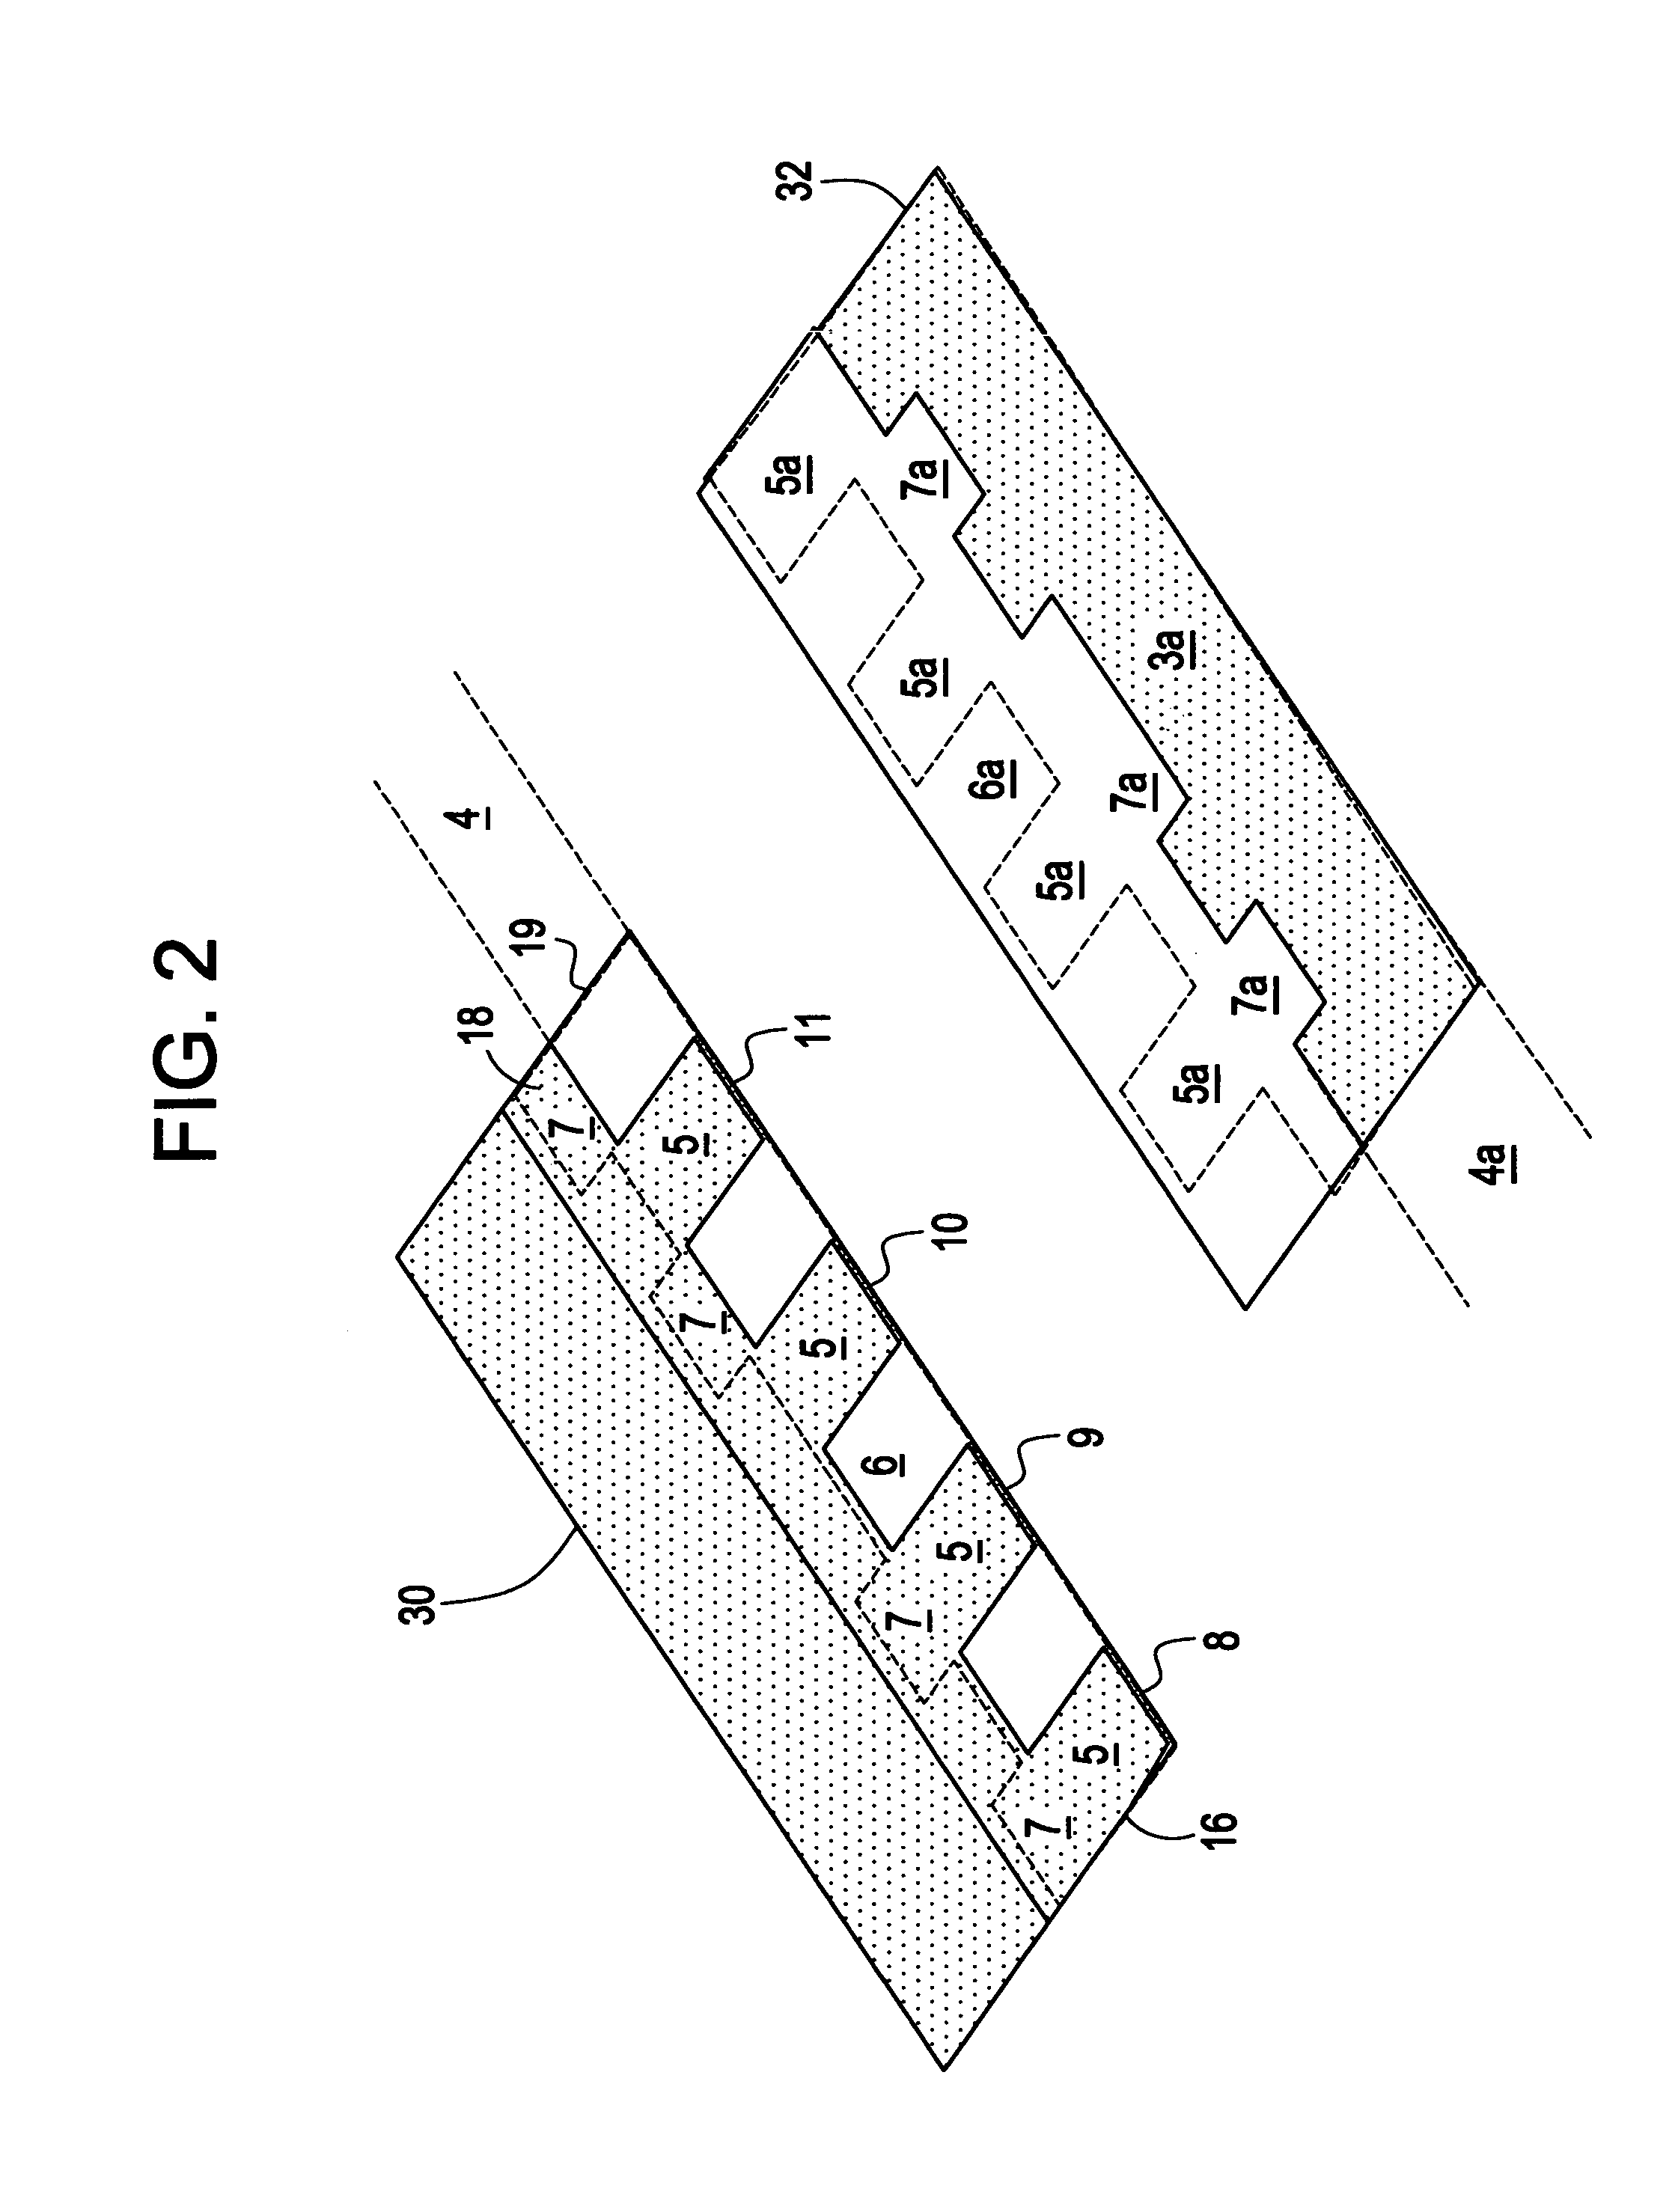 Packaging of tabbed composite shingles having a backer strip containing uniform, identically spaced, vertical projections on its top edge